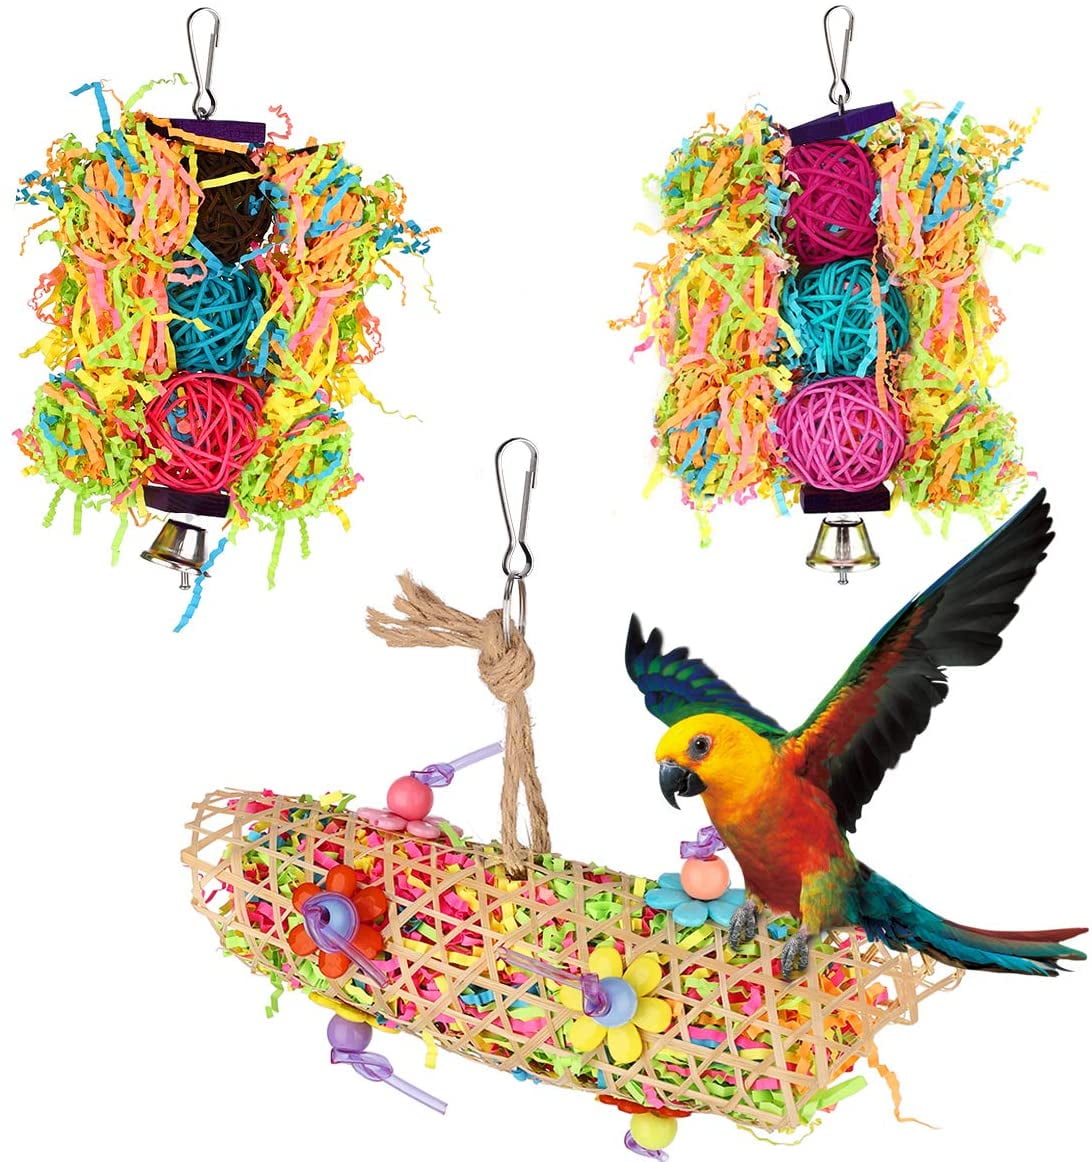 AzsfUfsa53 Durable Pets Supplies Playing Toys 3/4/5/6/7/8 Steps Wooden Pet Bird Parrot Climbing Hanging Ladder Cage Chew Toy Wood Color 3 Steps 